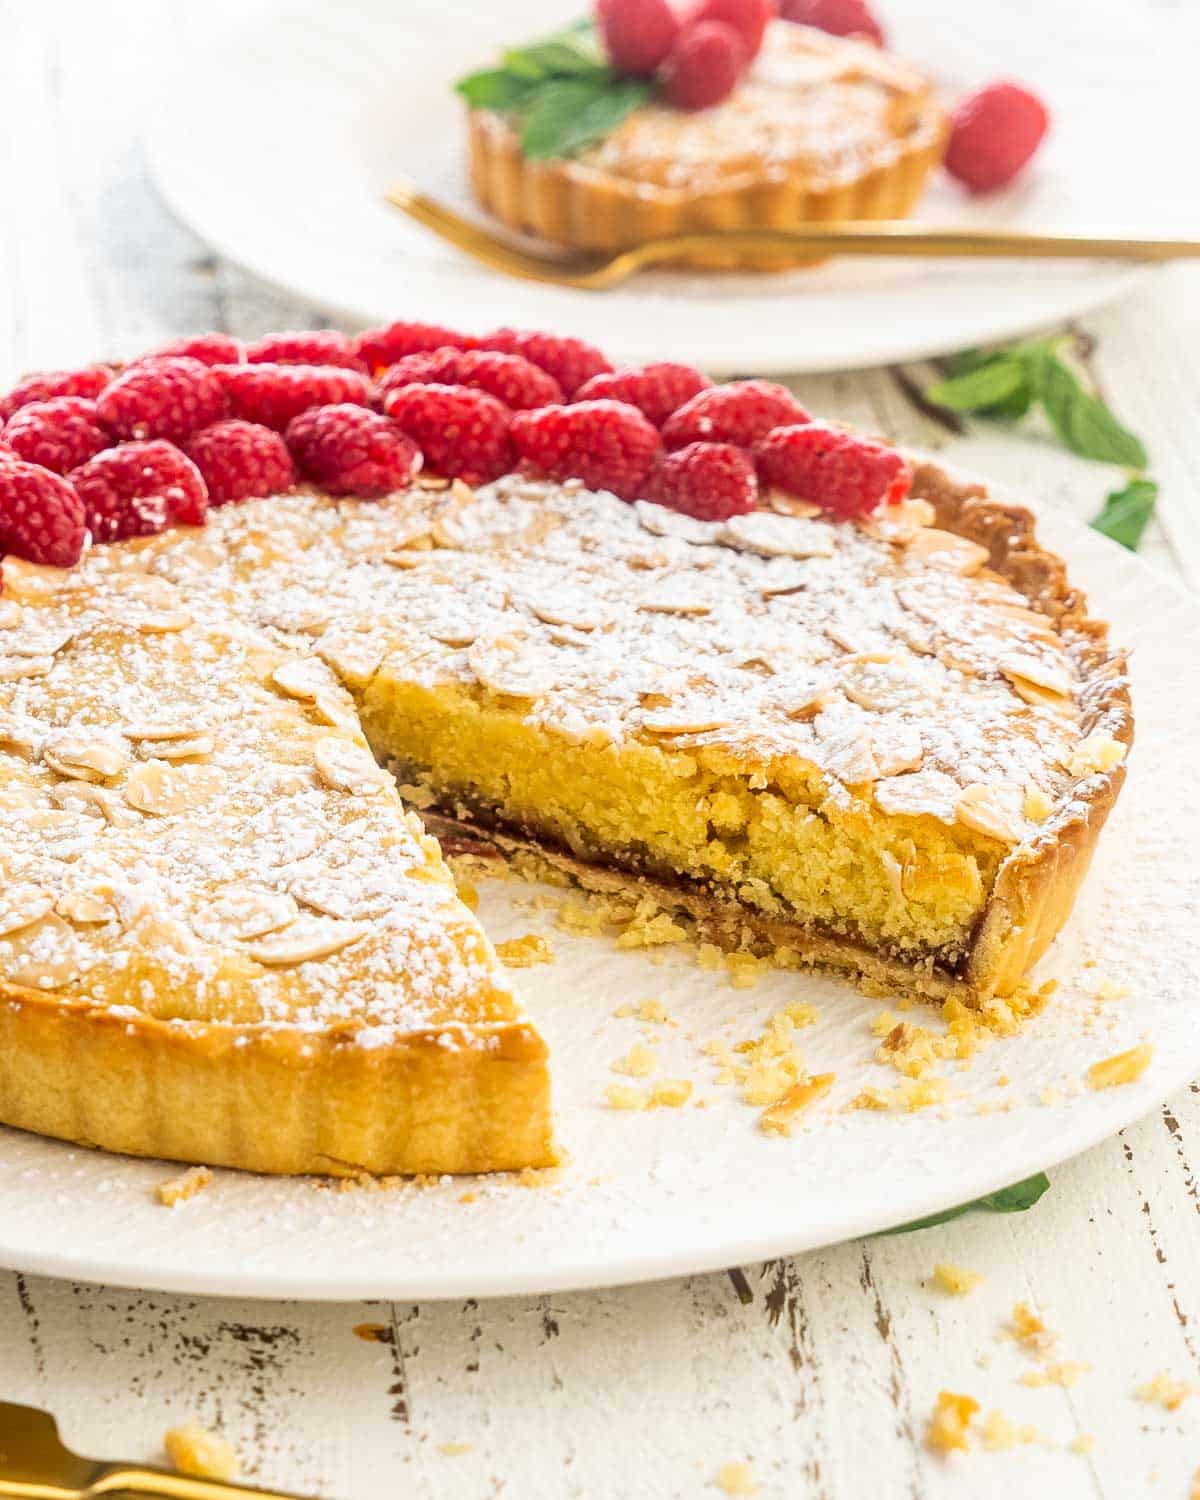 a bakewell tart on a serving platter with a slice missing garnished with raspberries.